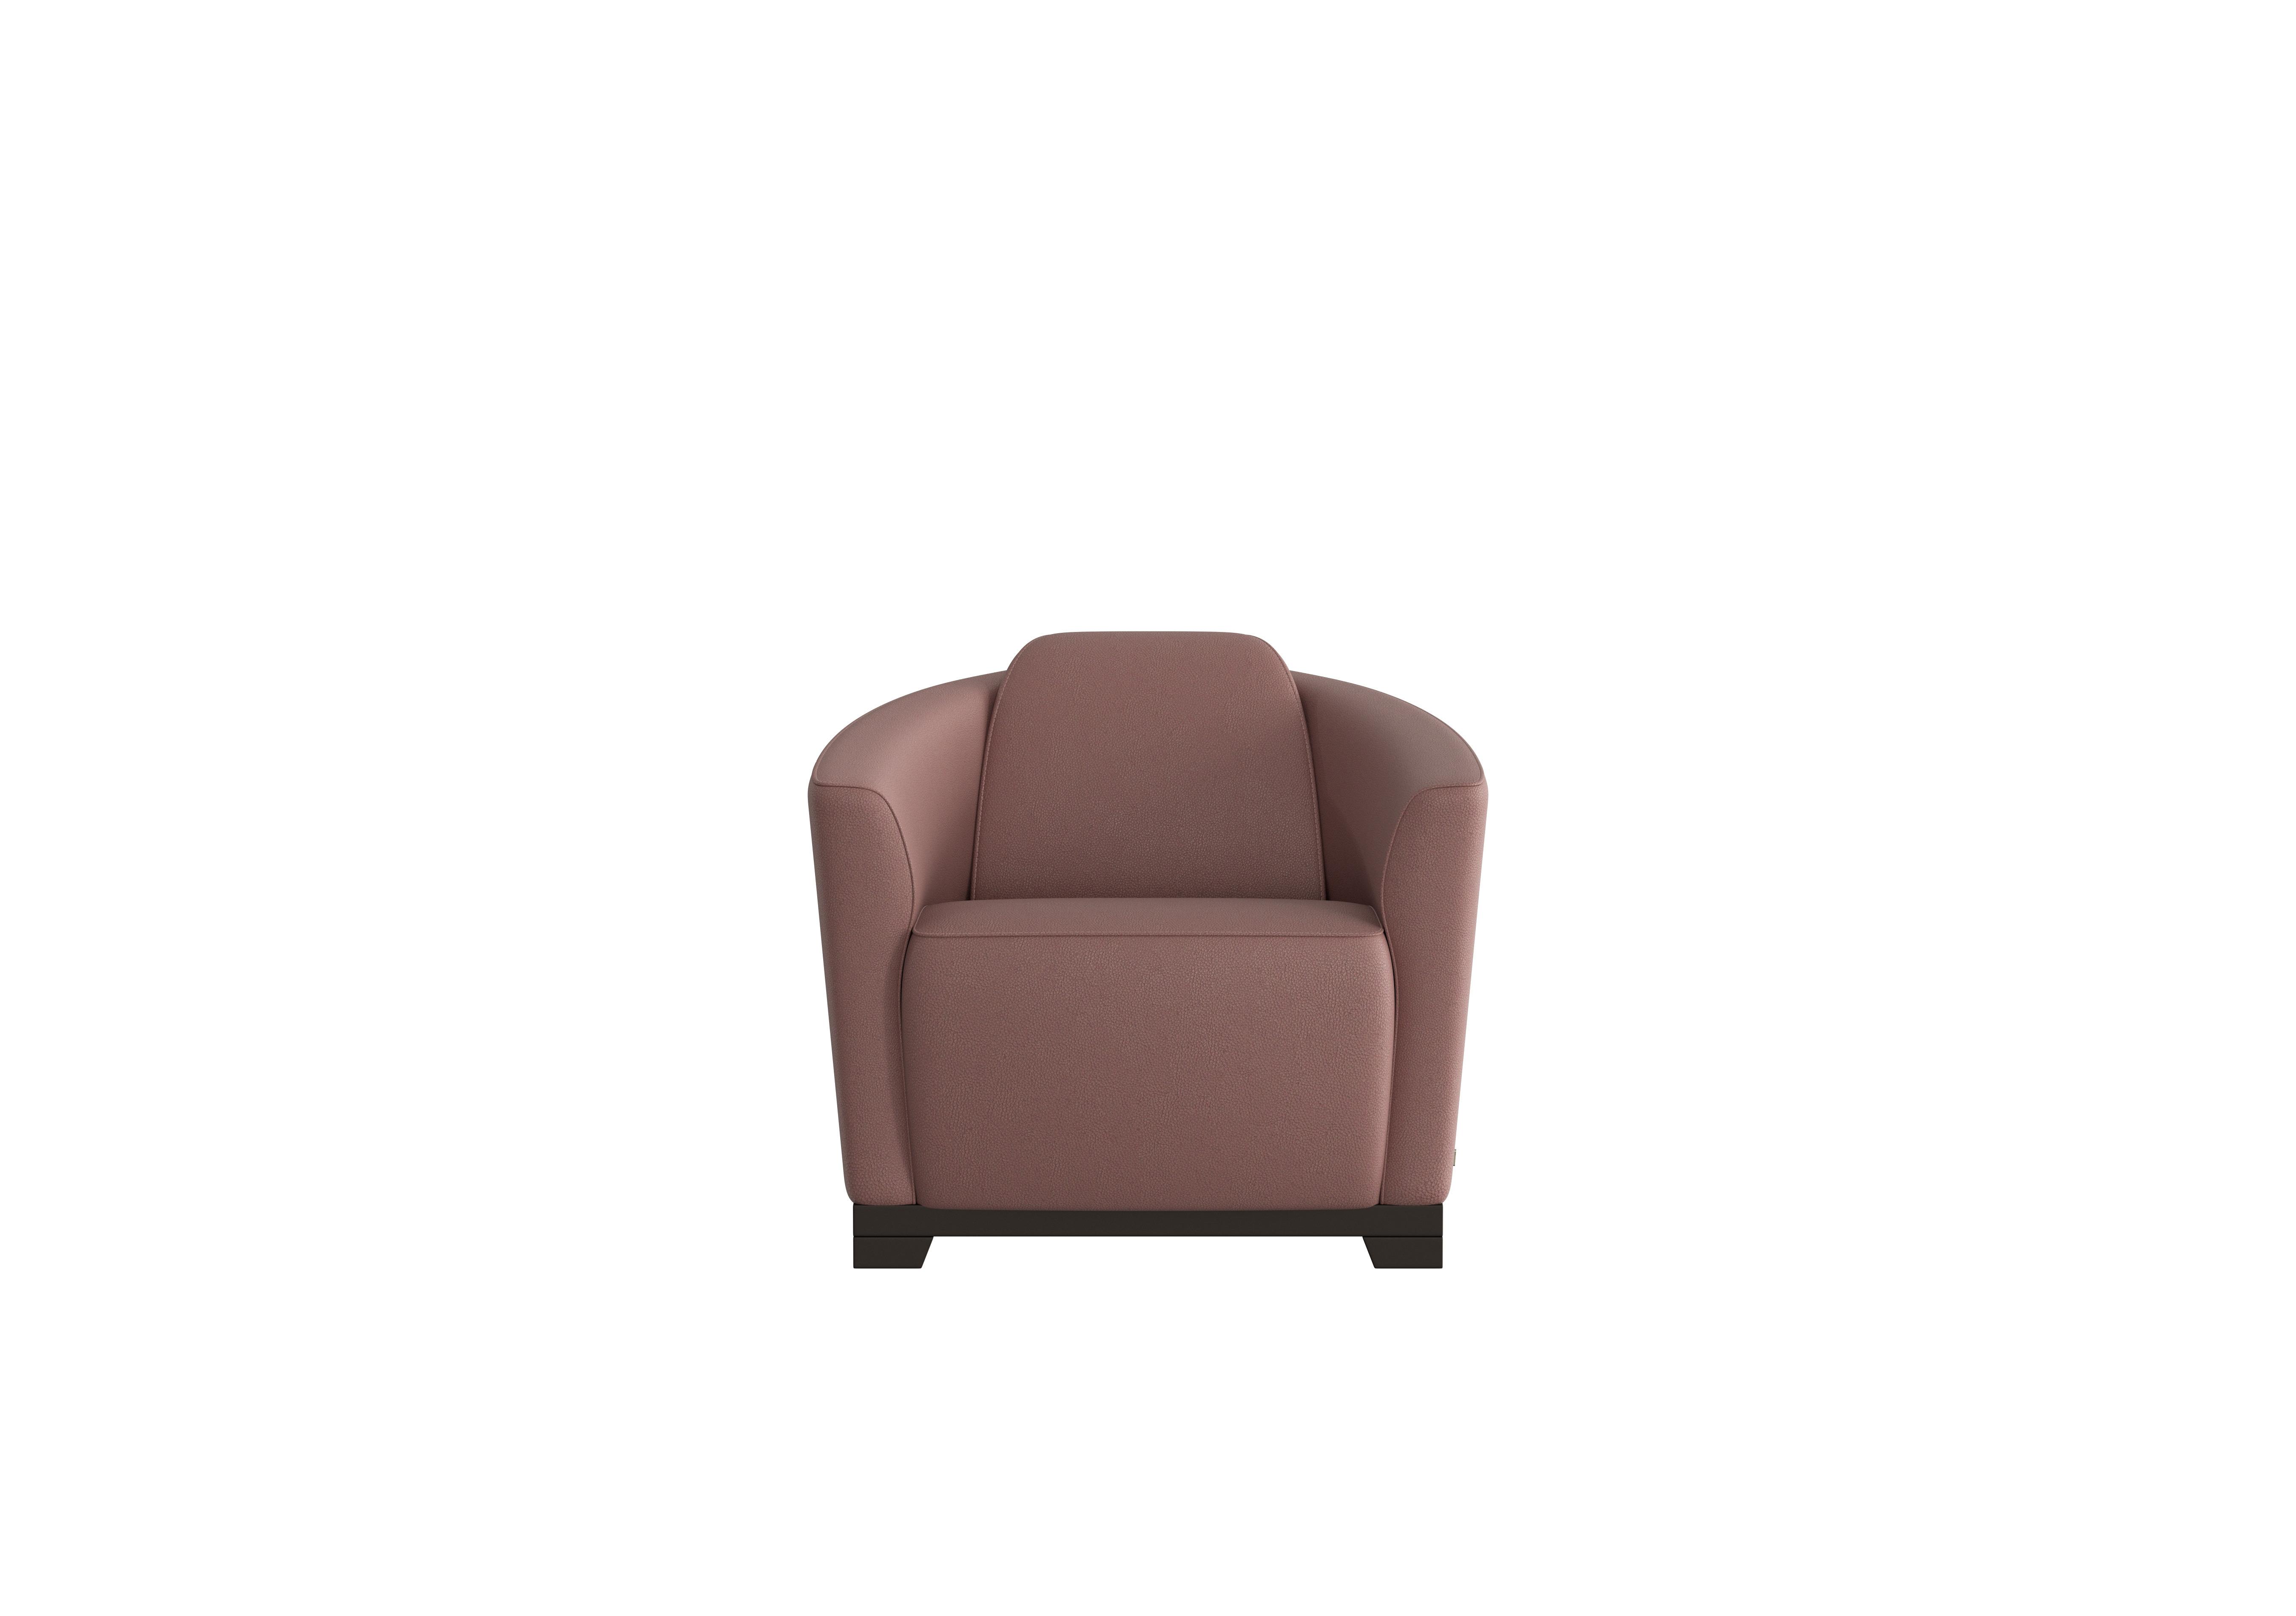 Ketty Leather Accent Chair in Botero Cipria 2160 on Furniture Village